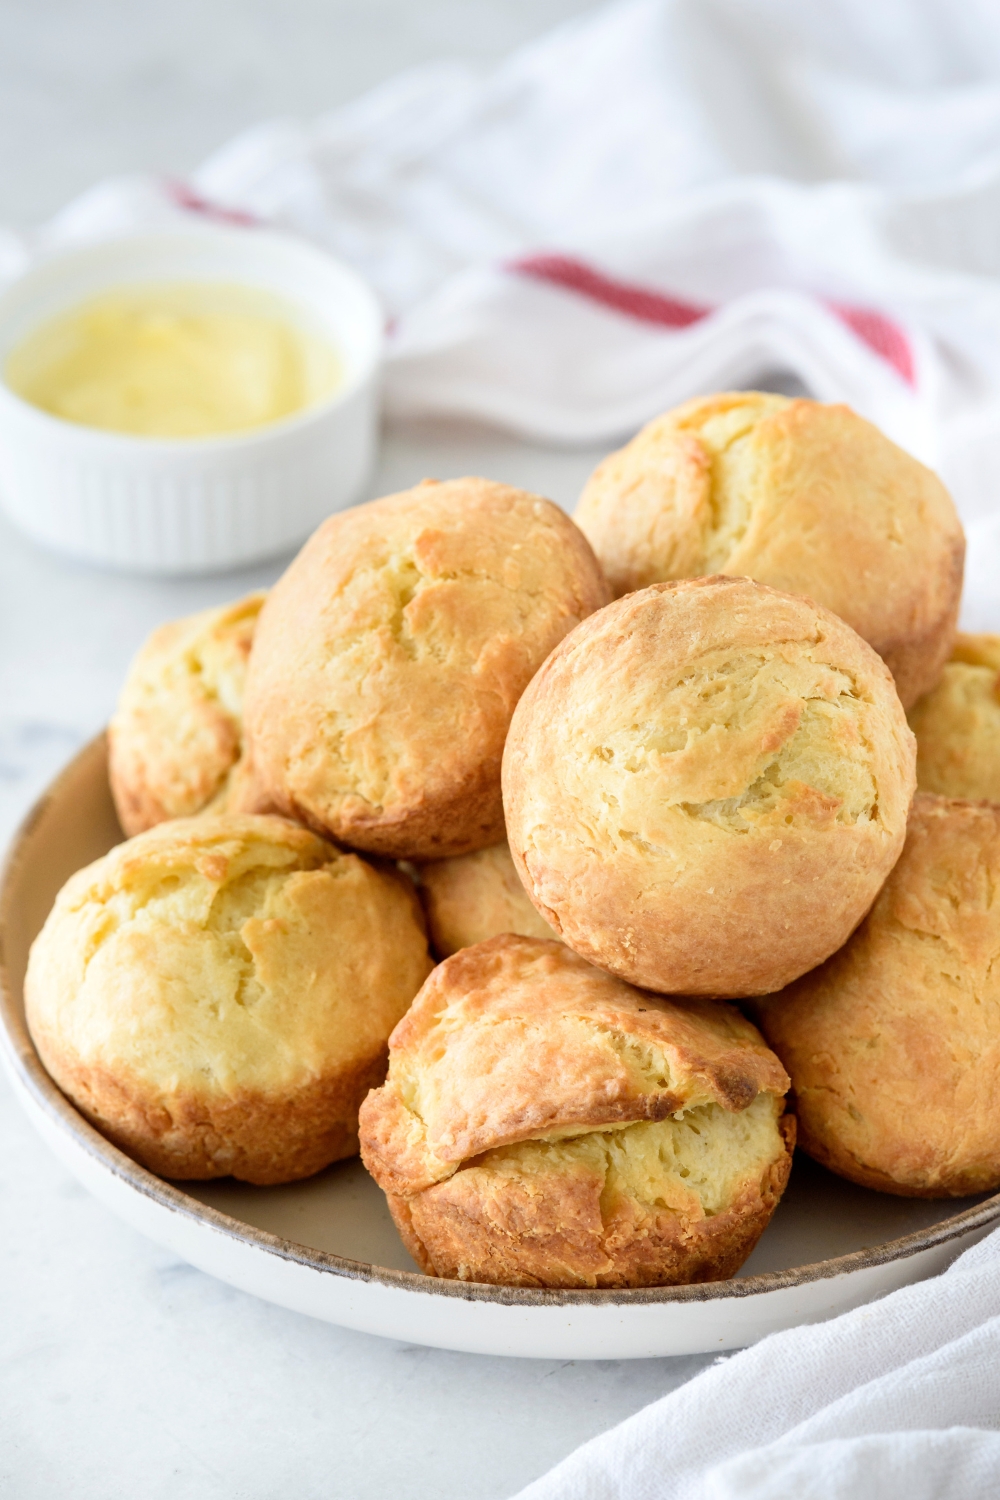 A pile of baked biscuits on a white plate